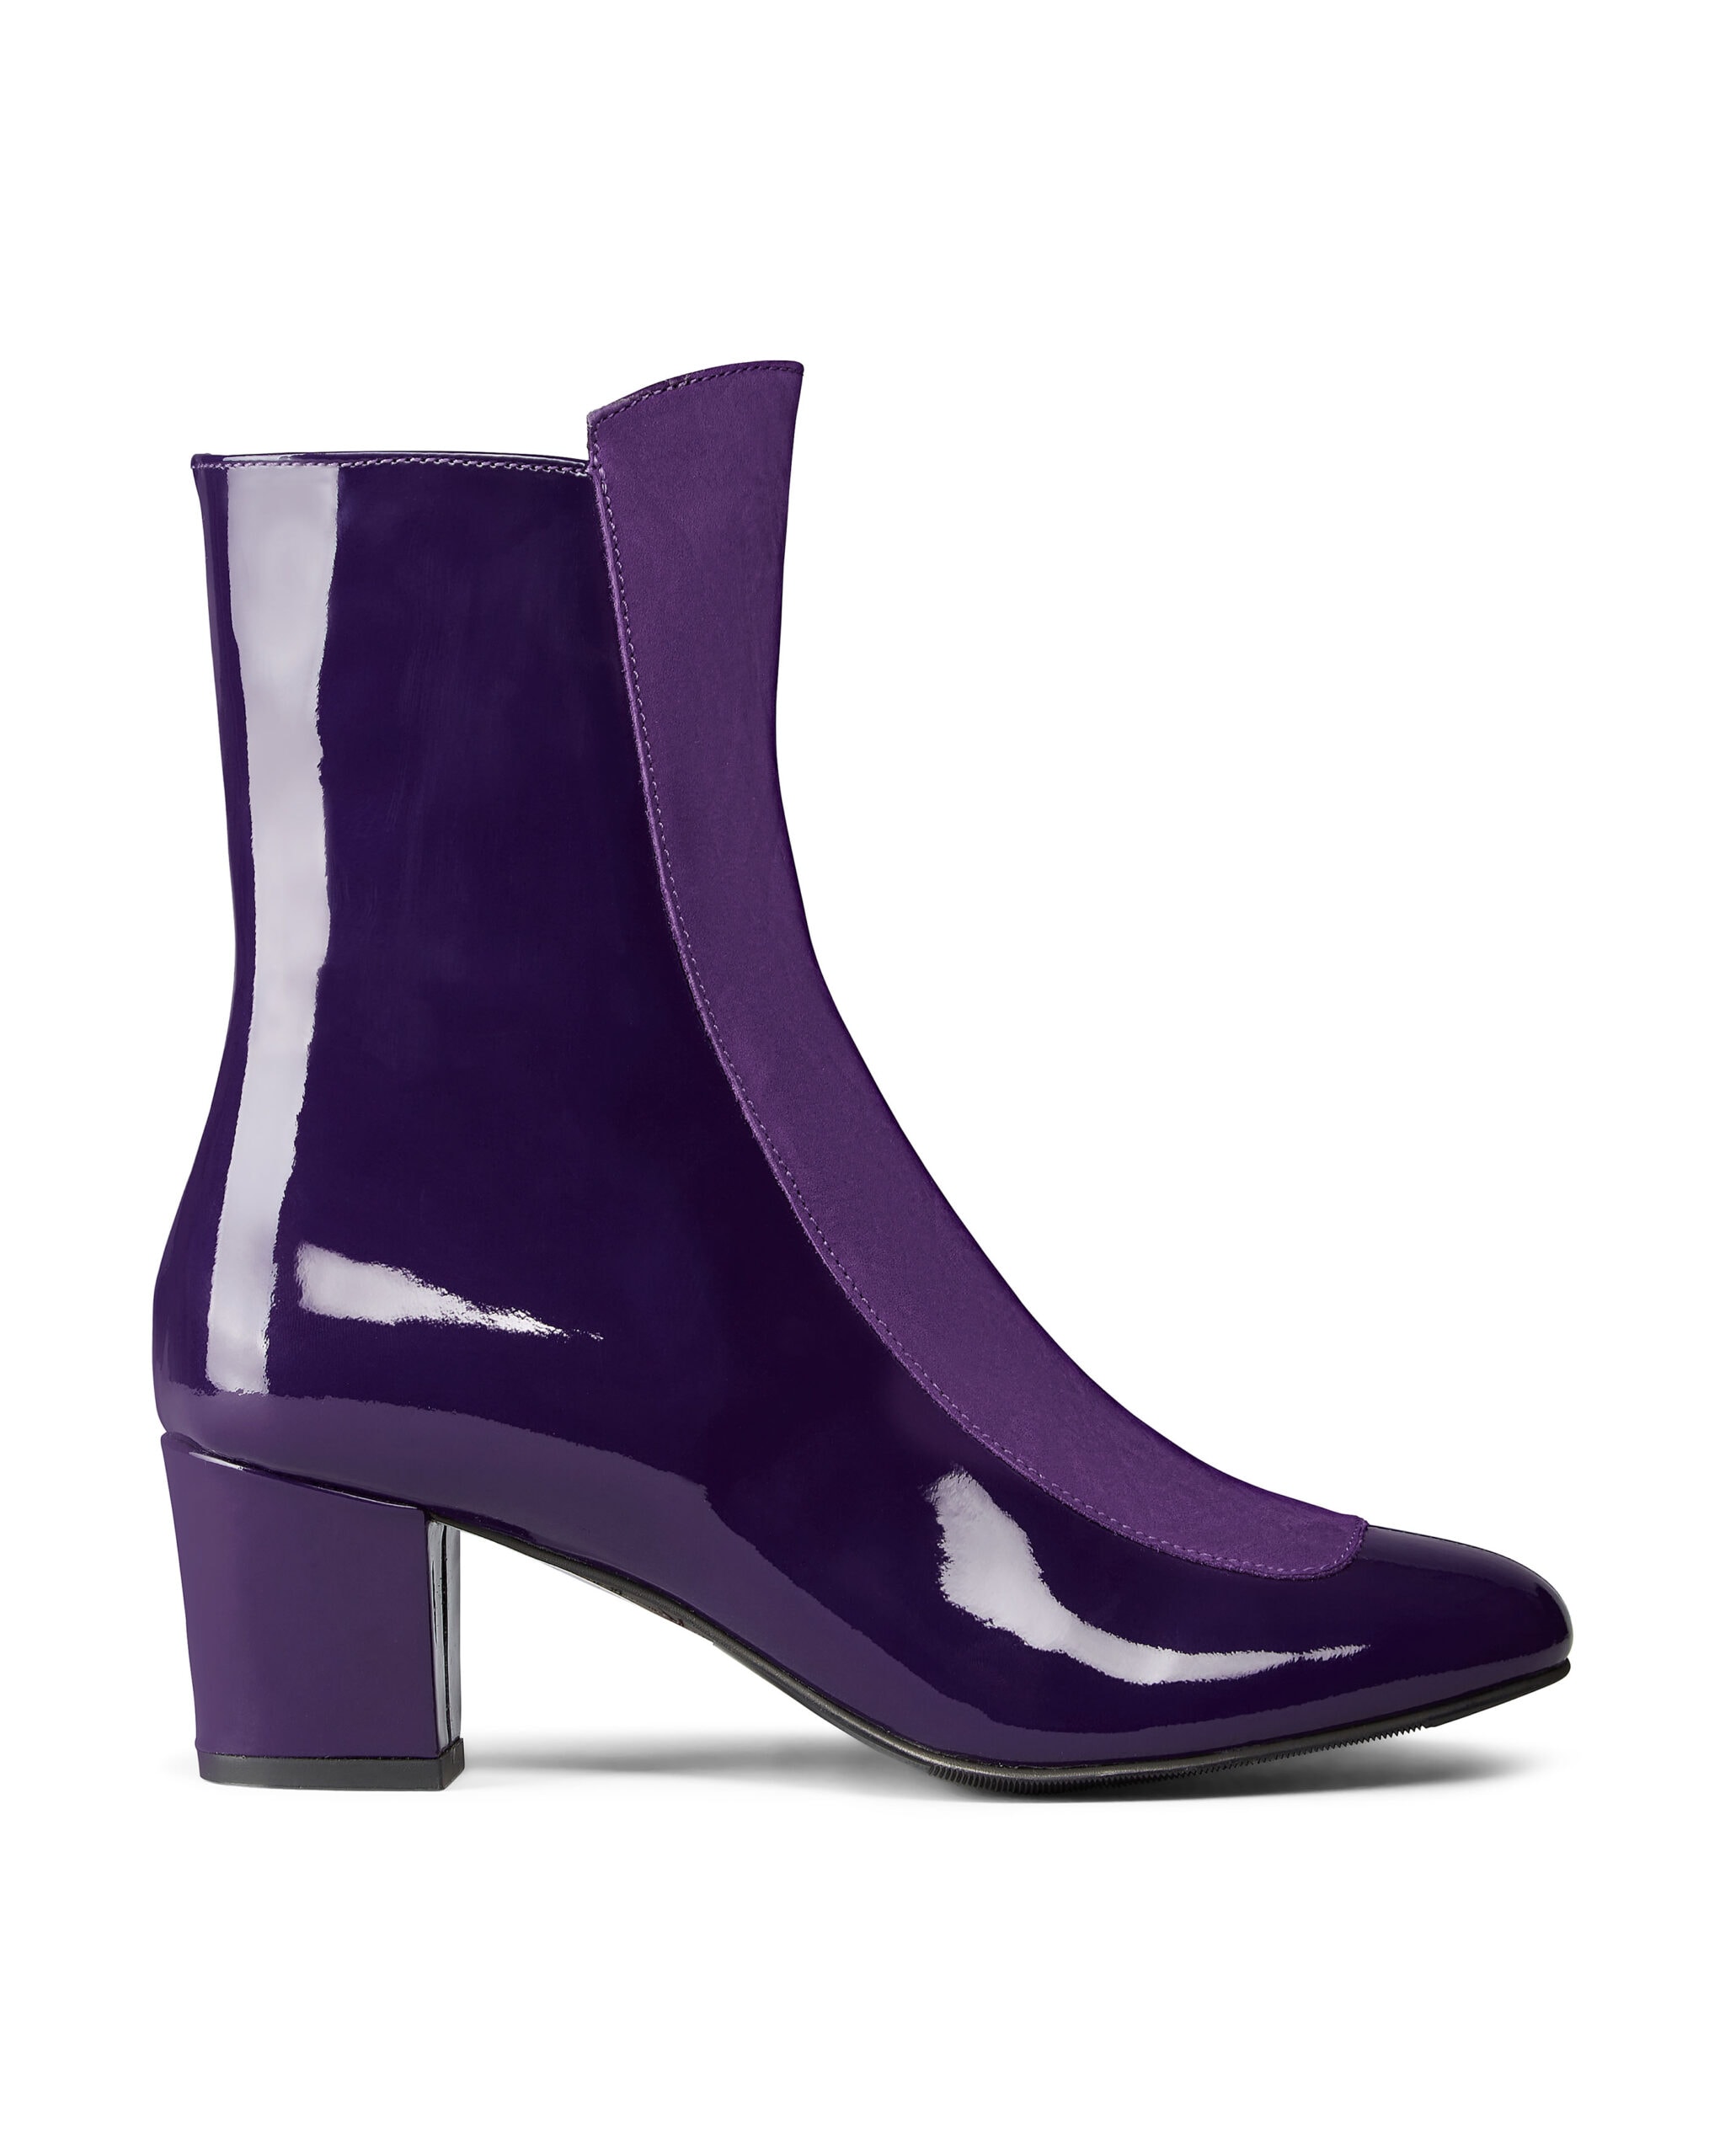 Ops&Ops No16 Purple Duo boot in patent leather and suede, side view